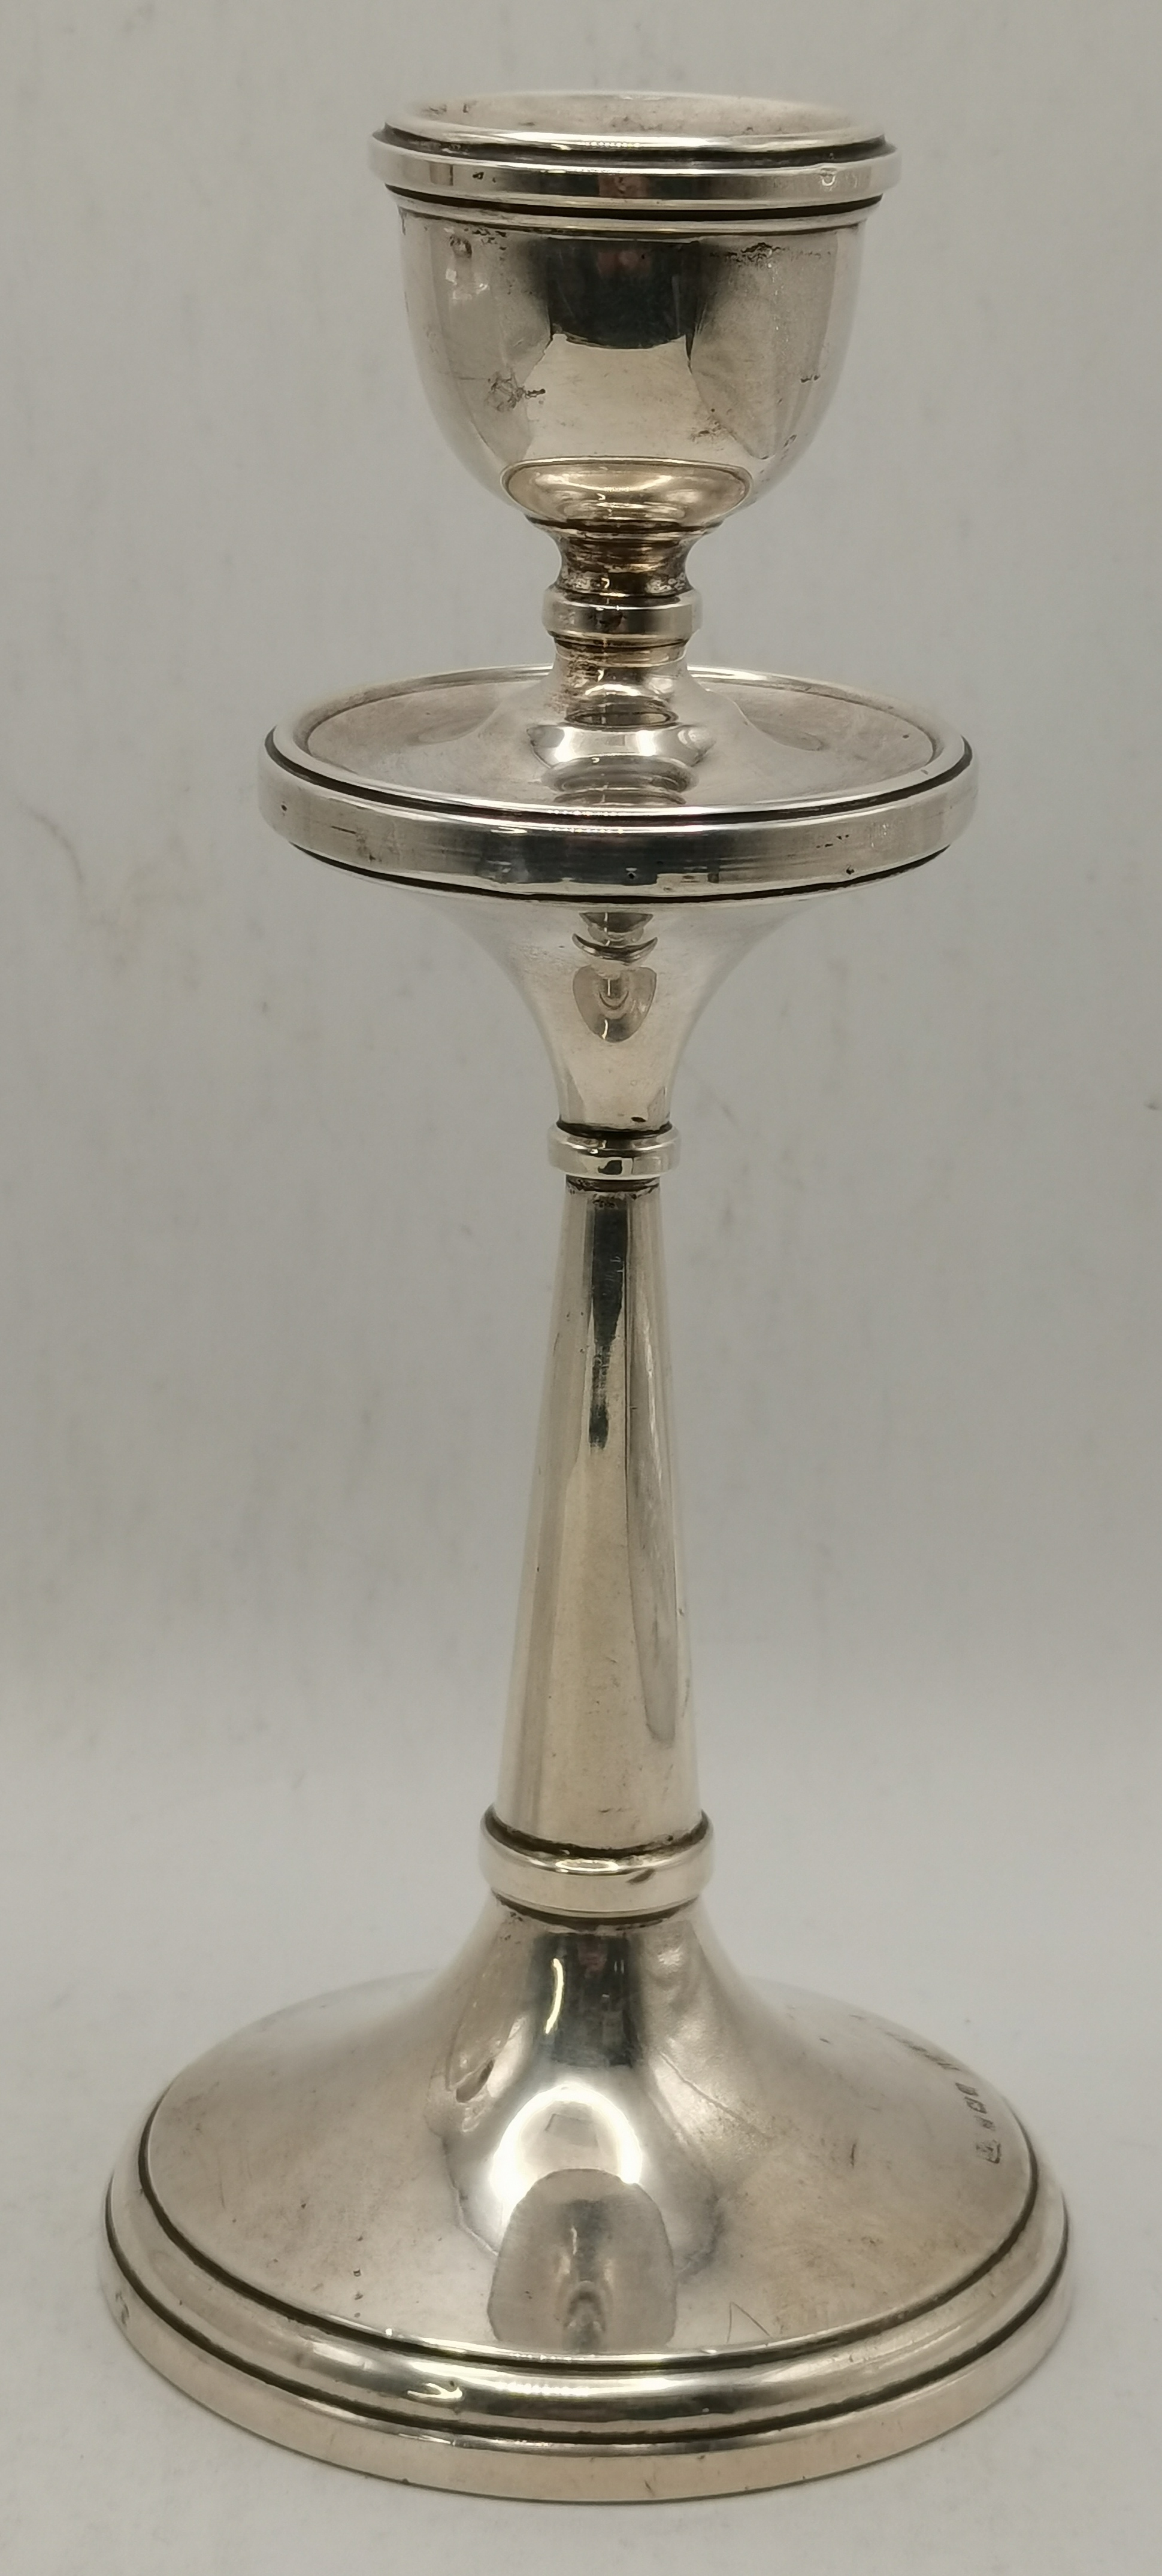 A silver candlestick and silver-mounted glass bottle - Image 4 of 5